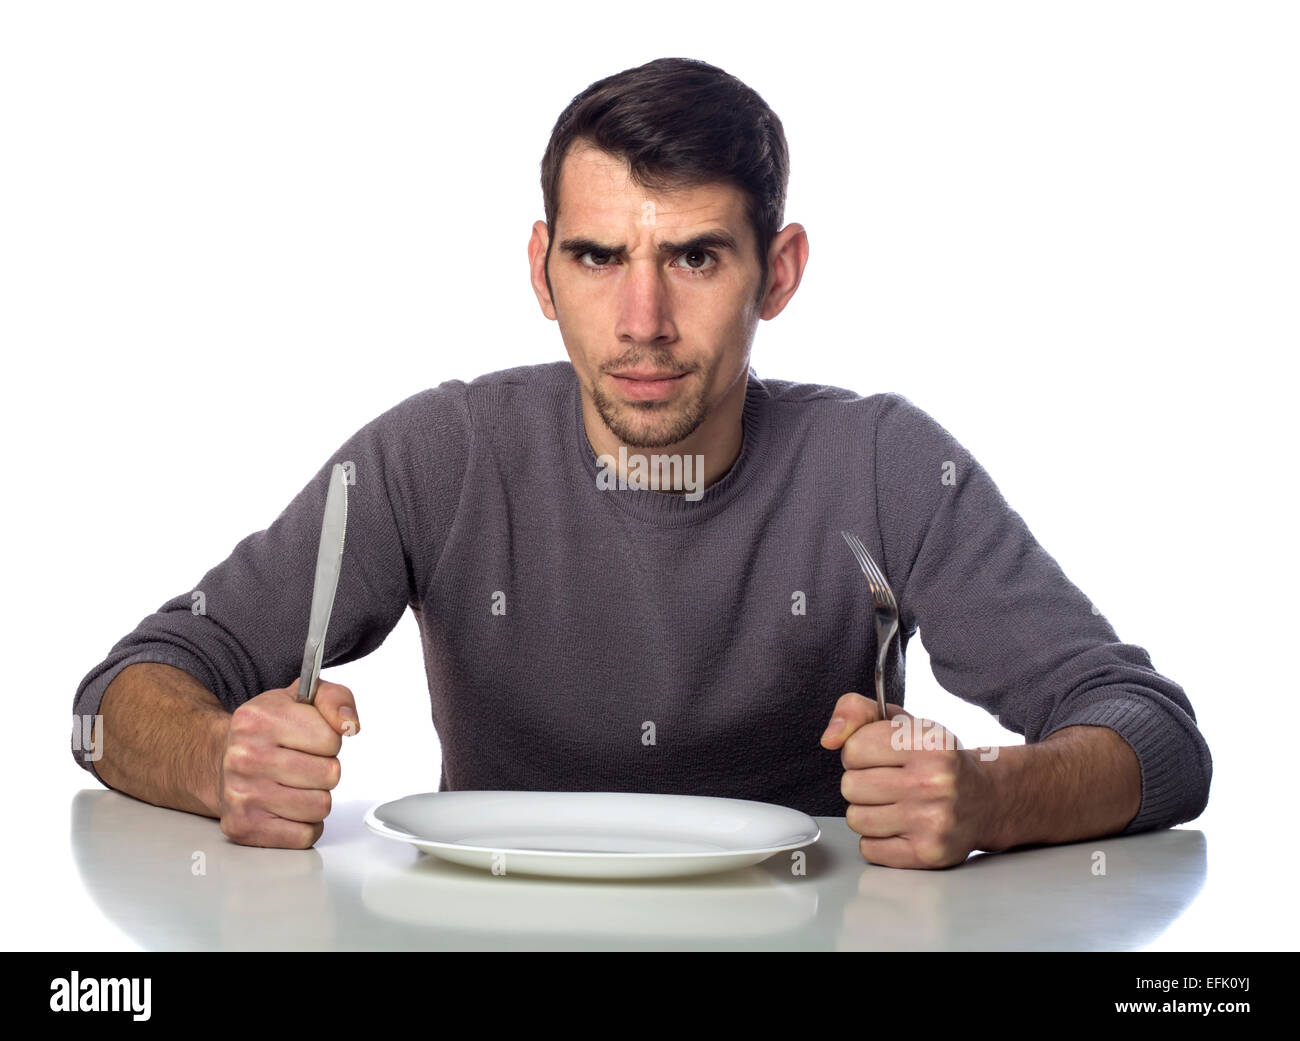 Man at dinner table with fork and knife raised. Hunger strike isolated over white background Stock Photo